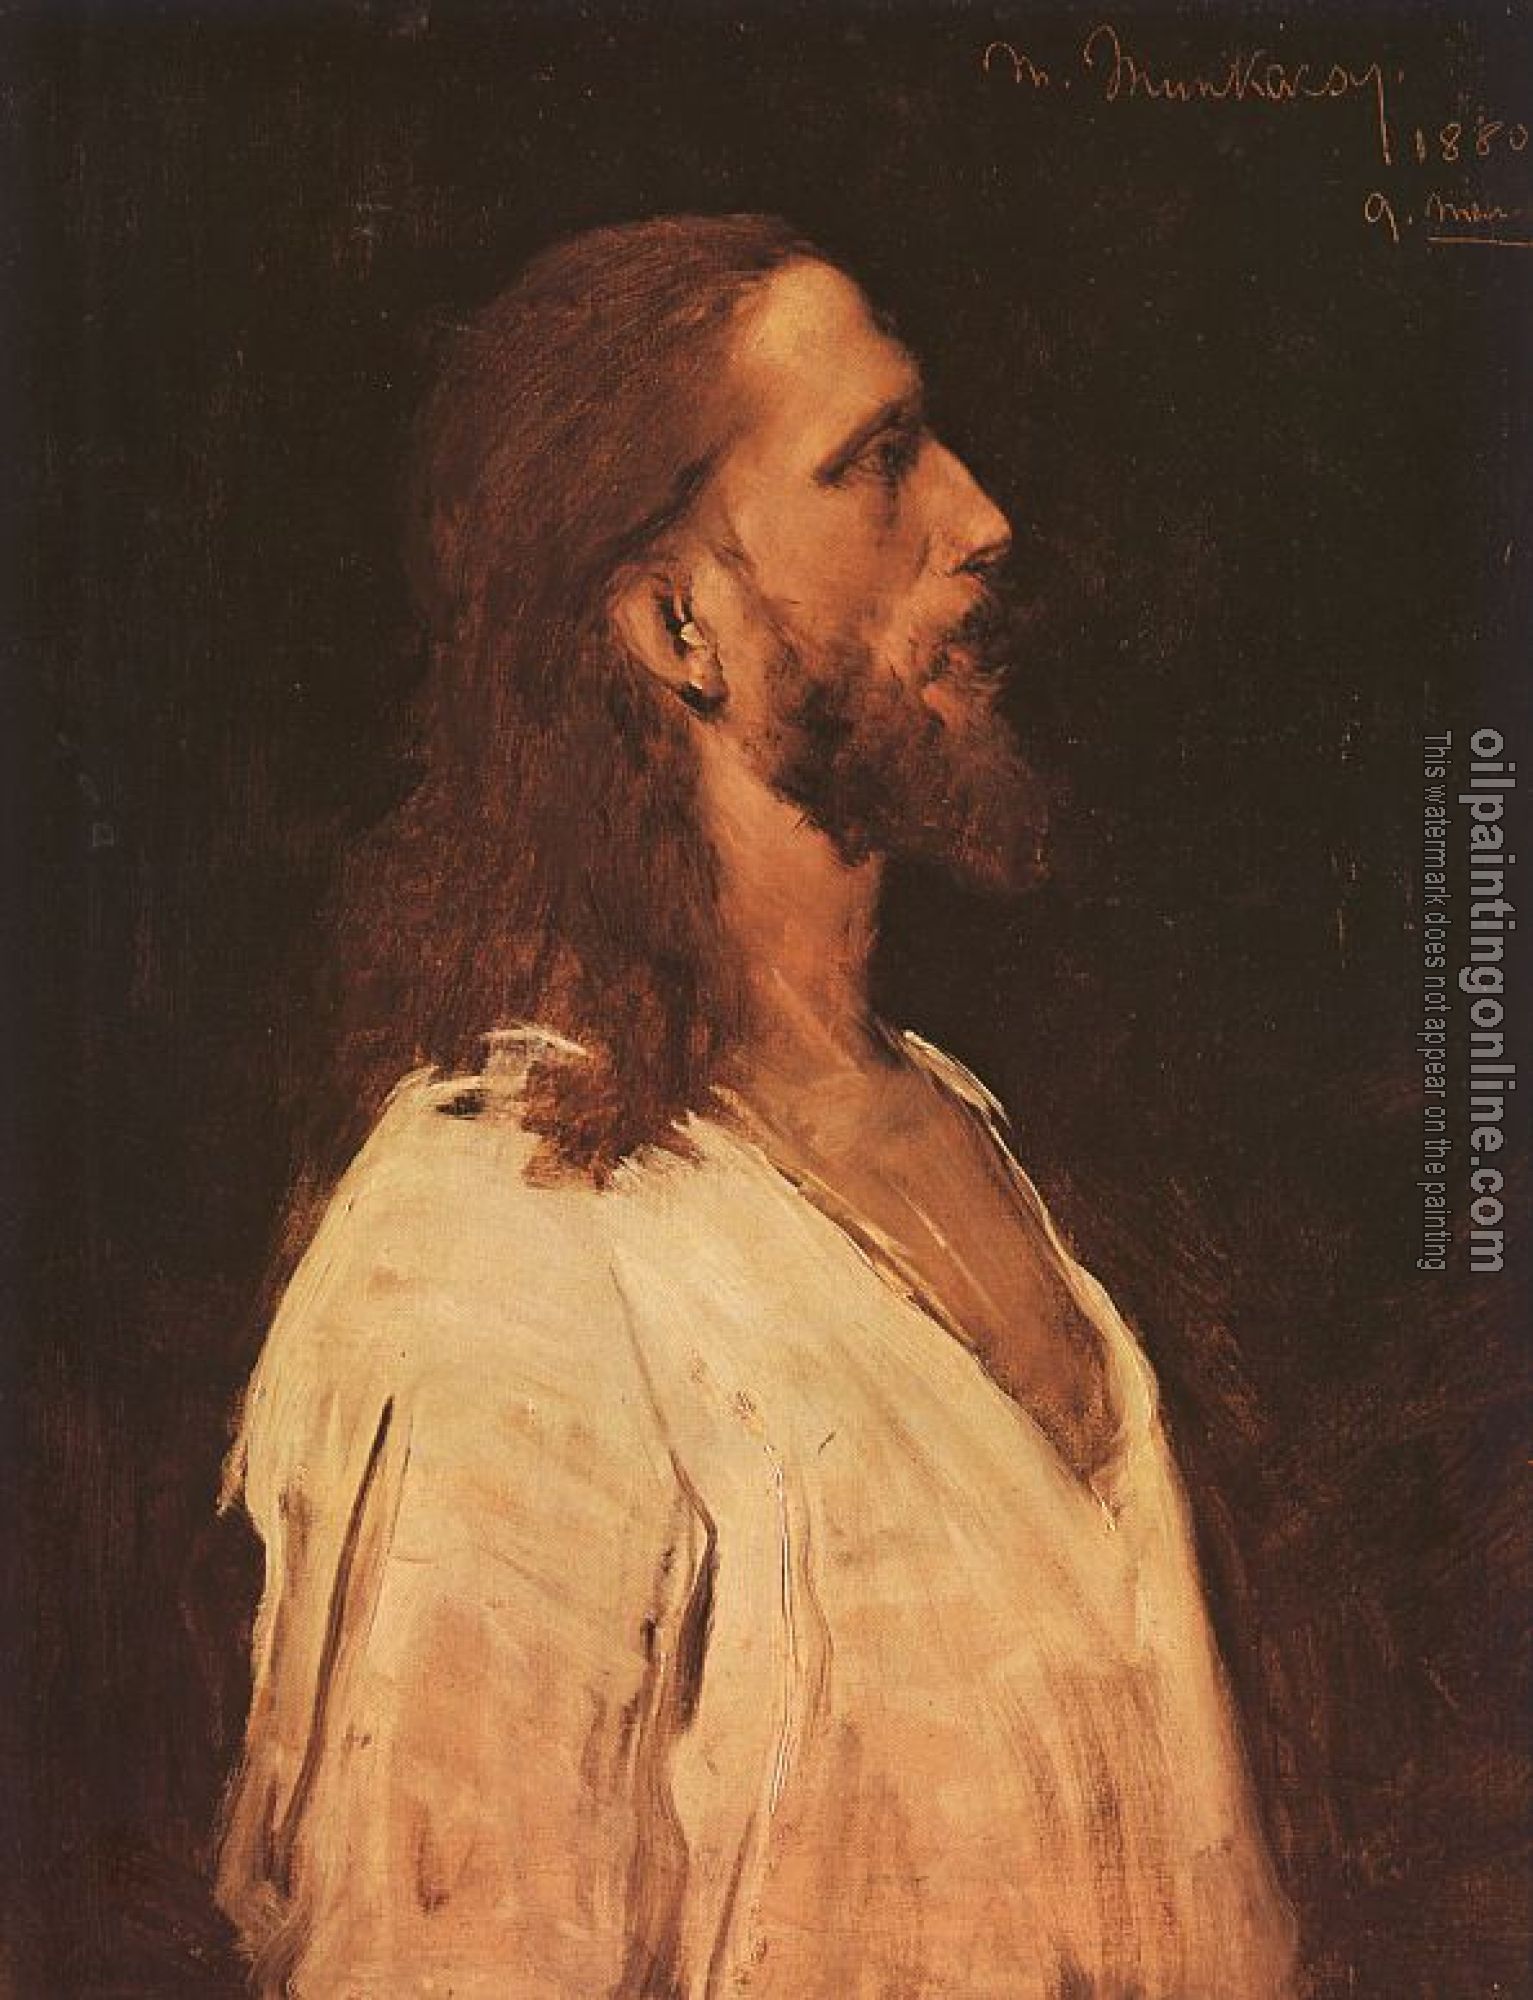 Munkacsy, Mihaly - Study for Christ before Pilate